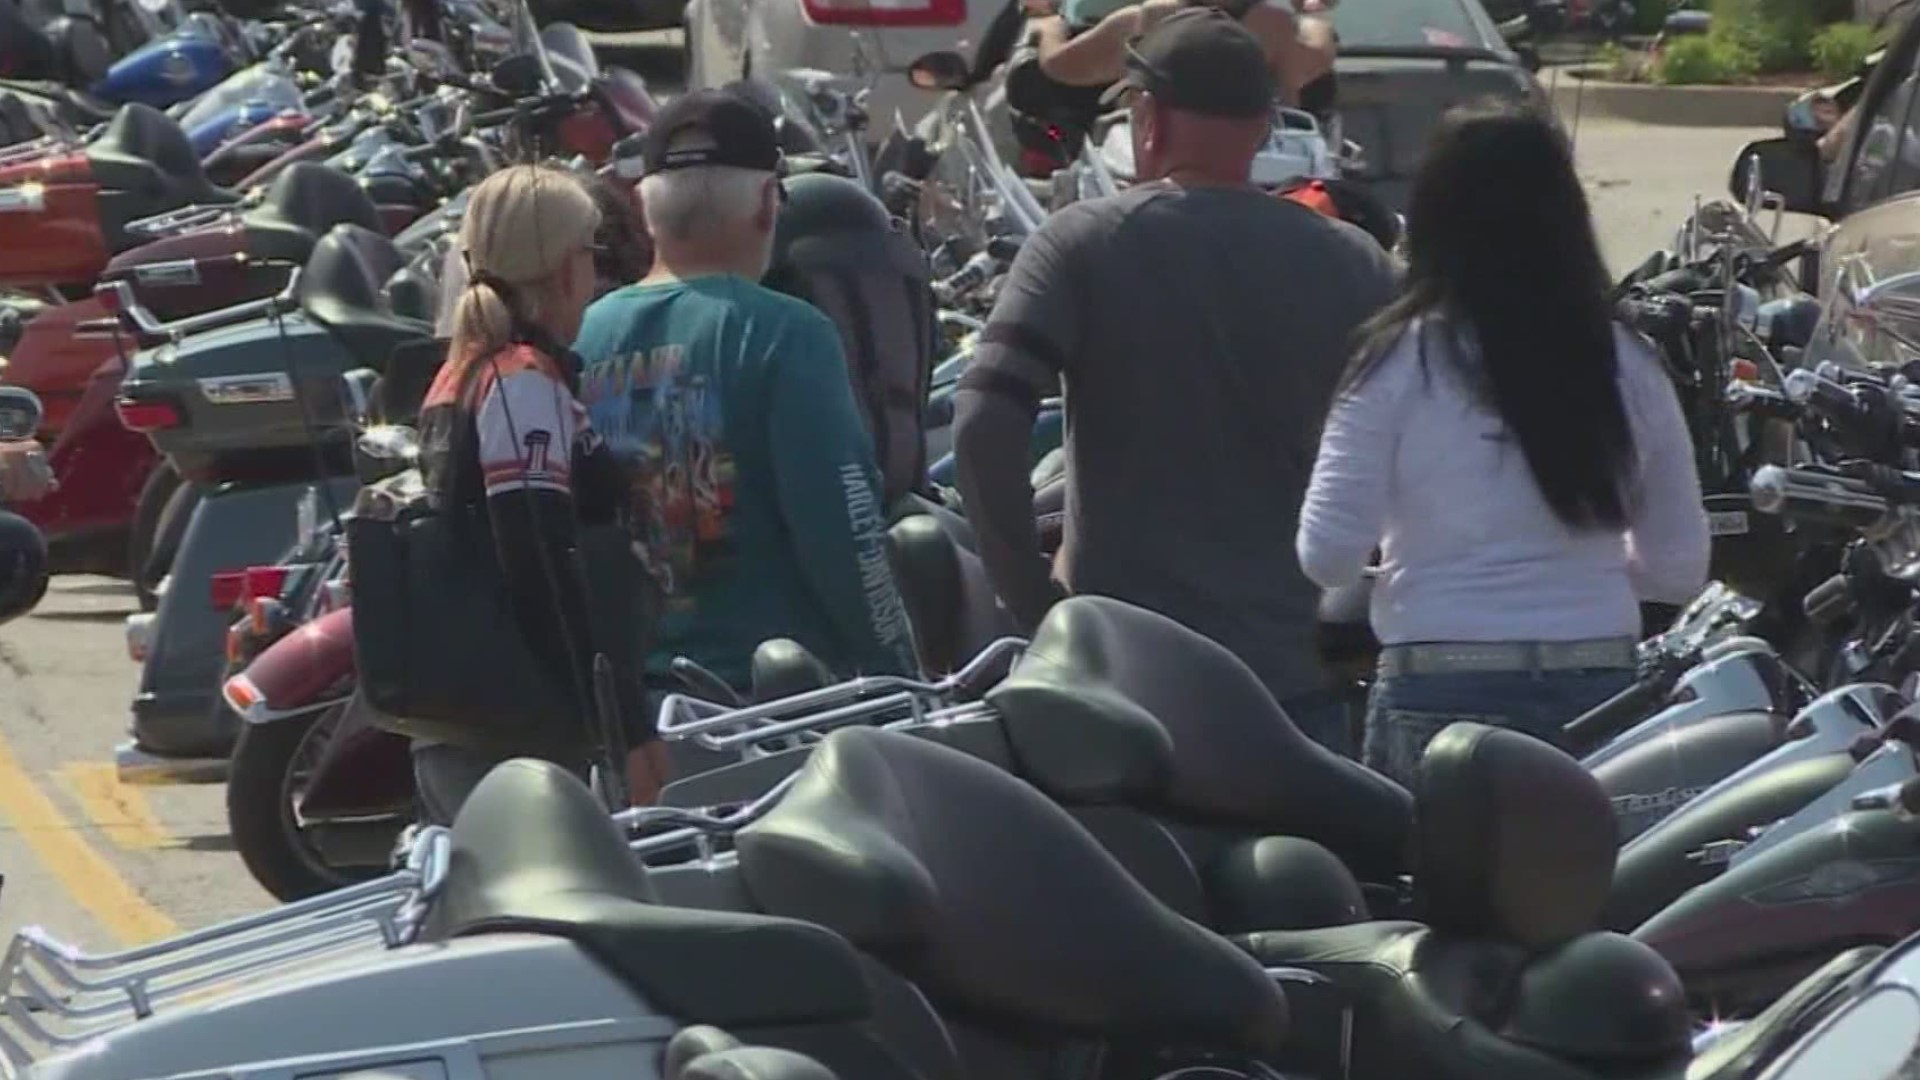 Motorcyclists head to Lake of the Ozarks for a motorcycle rally